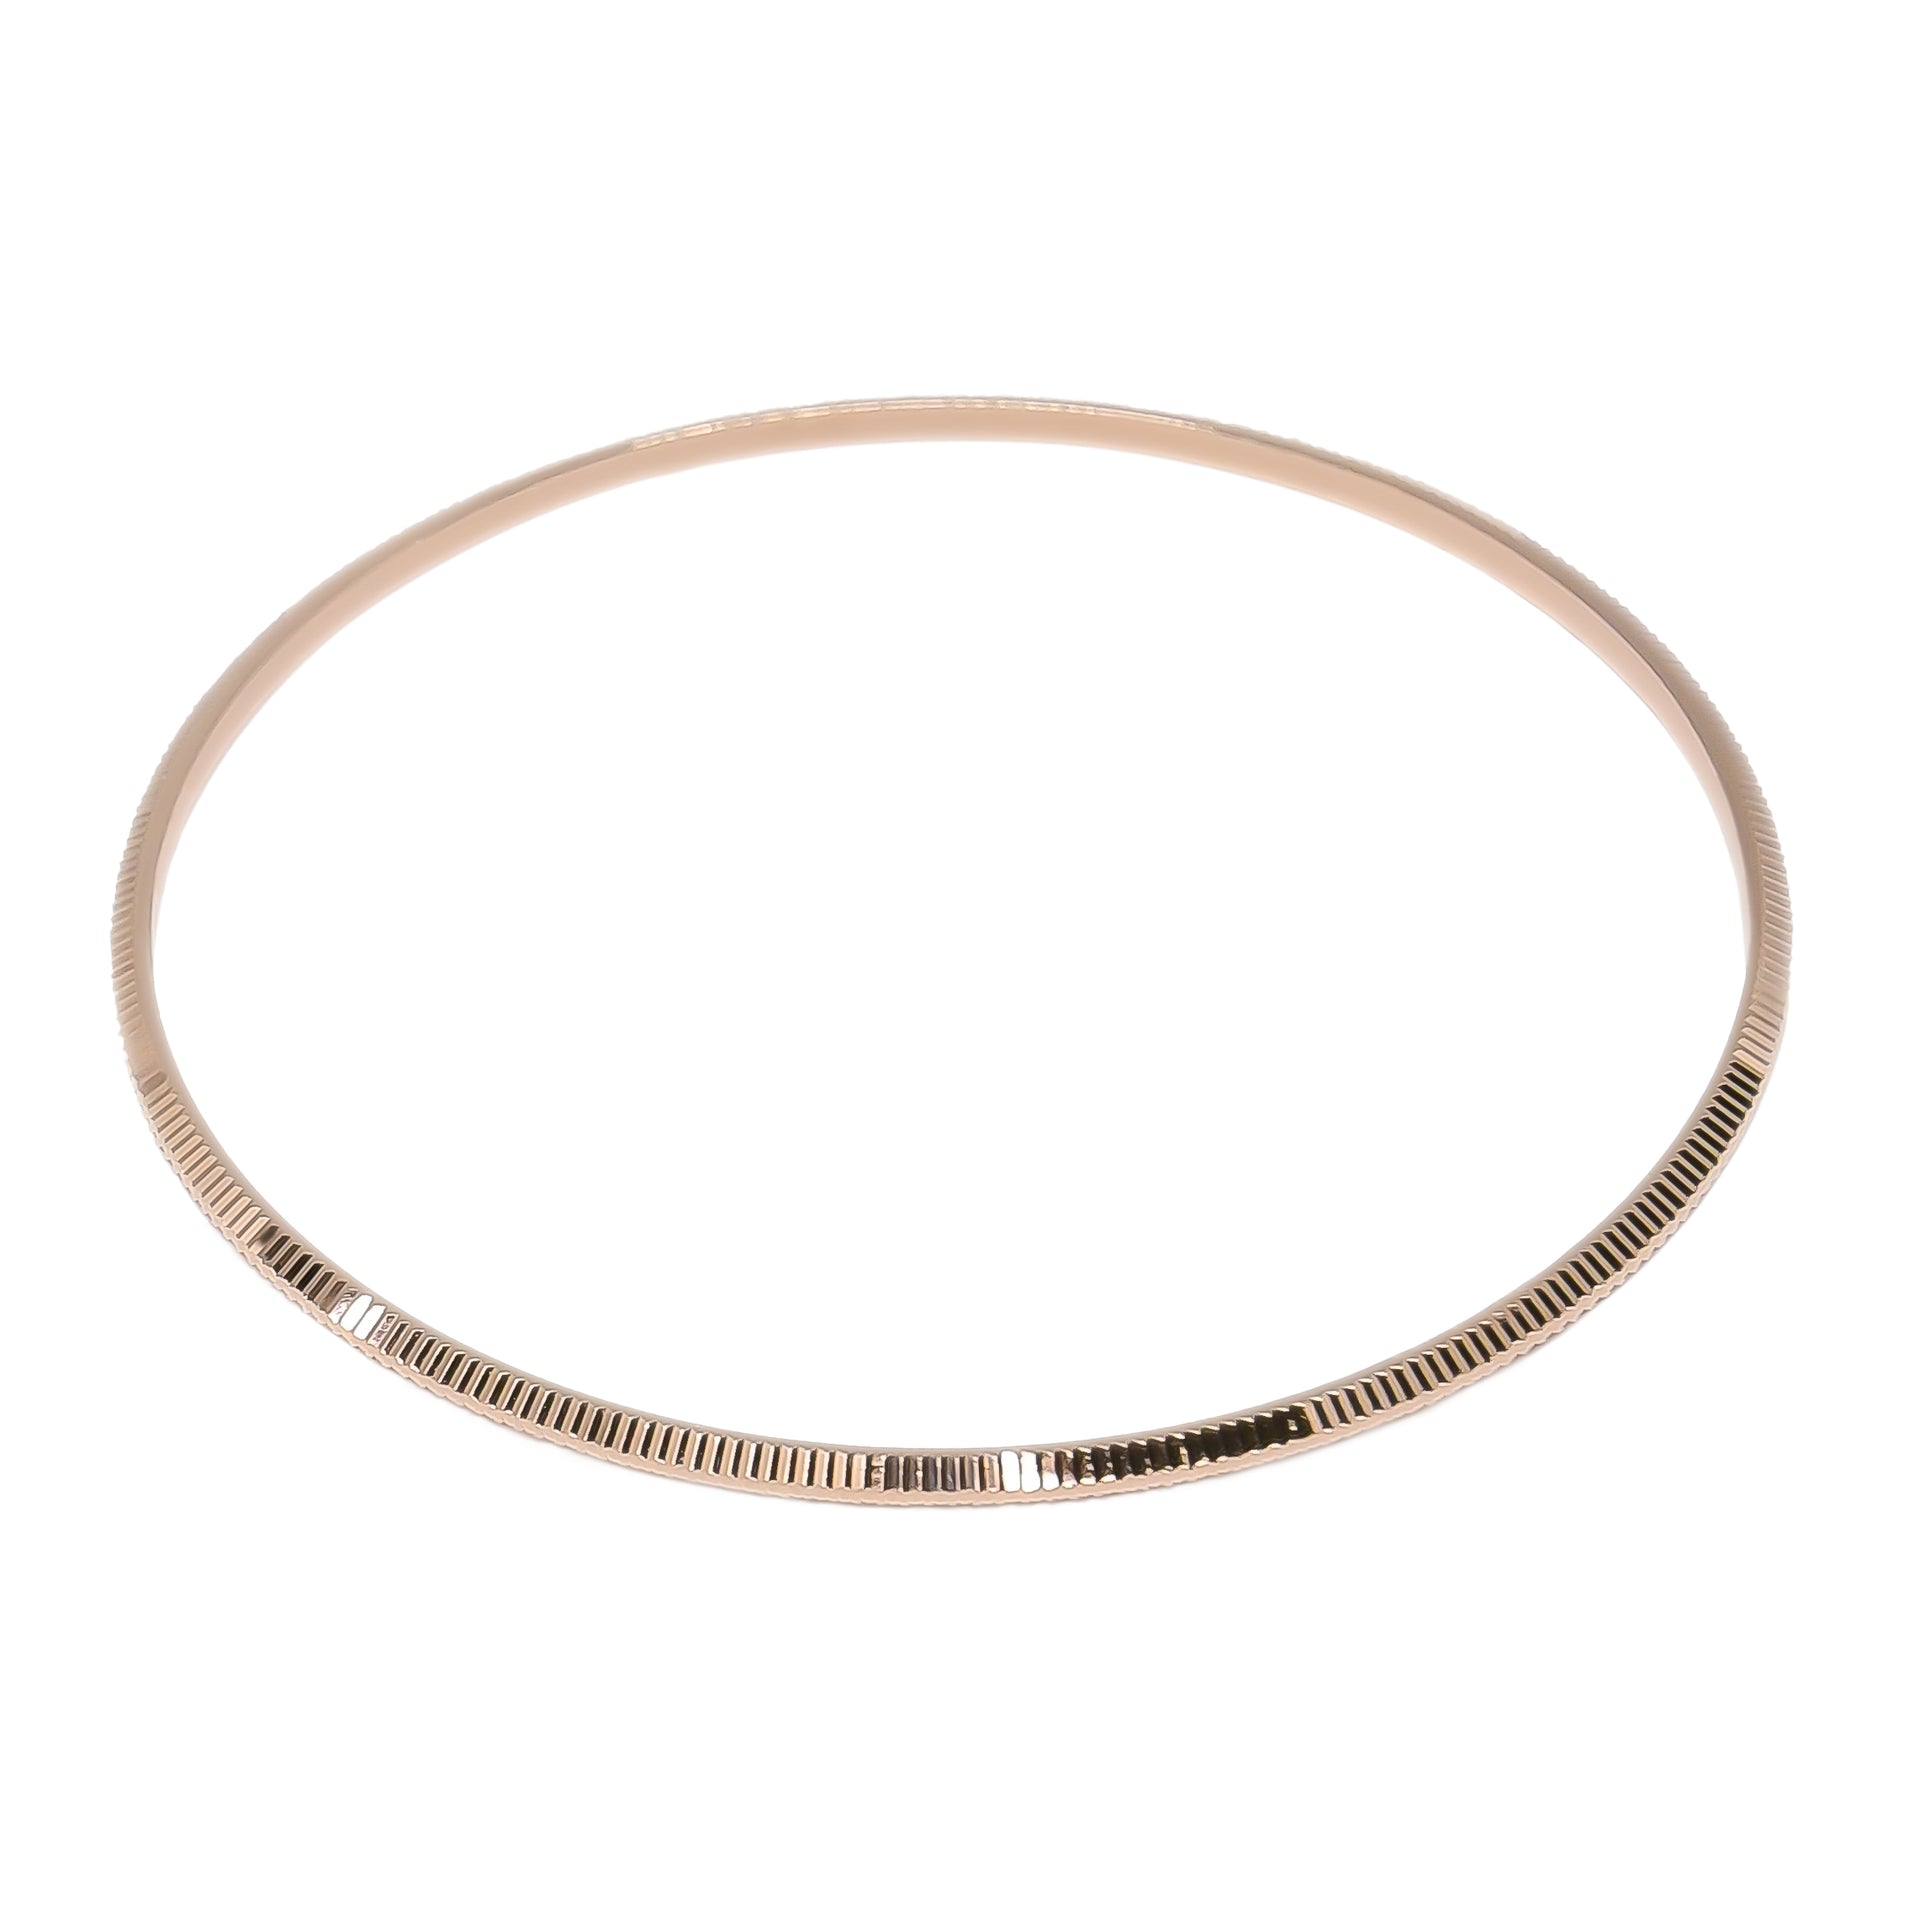 Bracelet EARTH IS ROUND 2mm profil triangle or rouge 18k 750